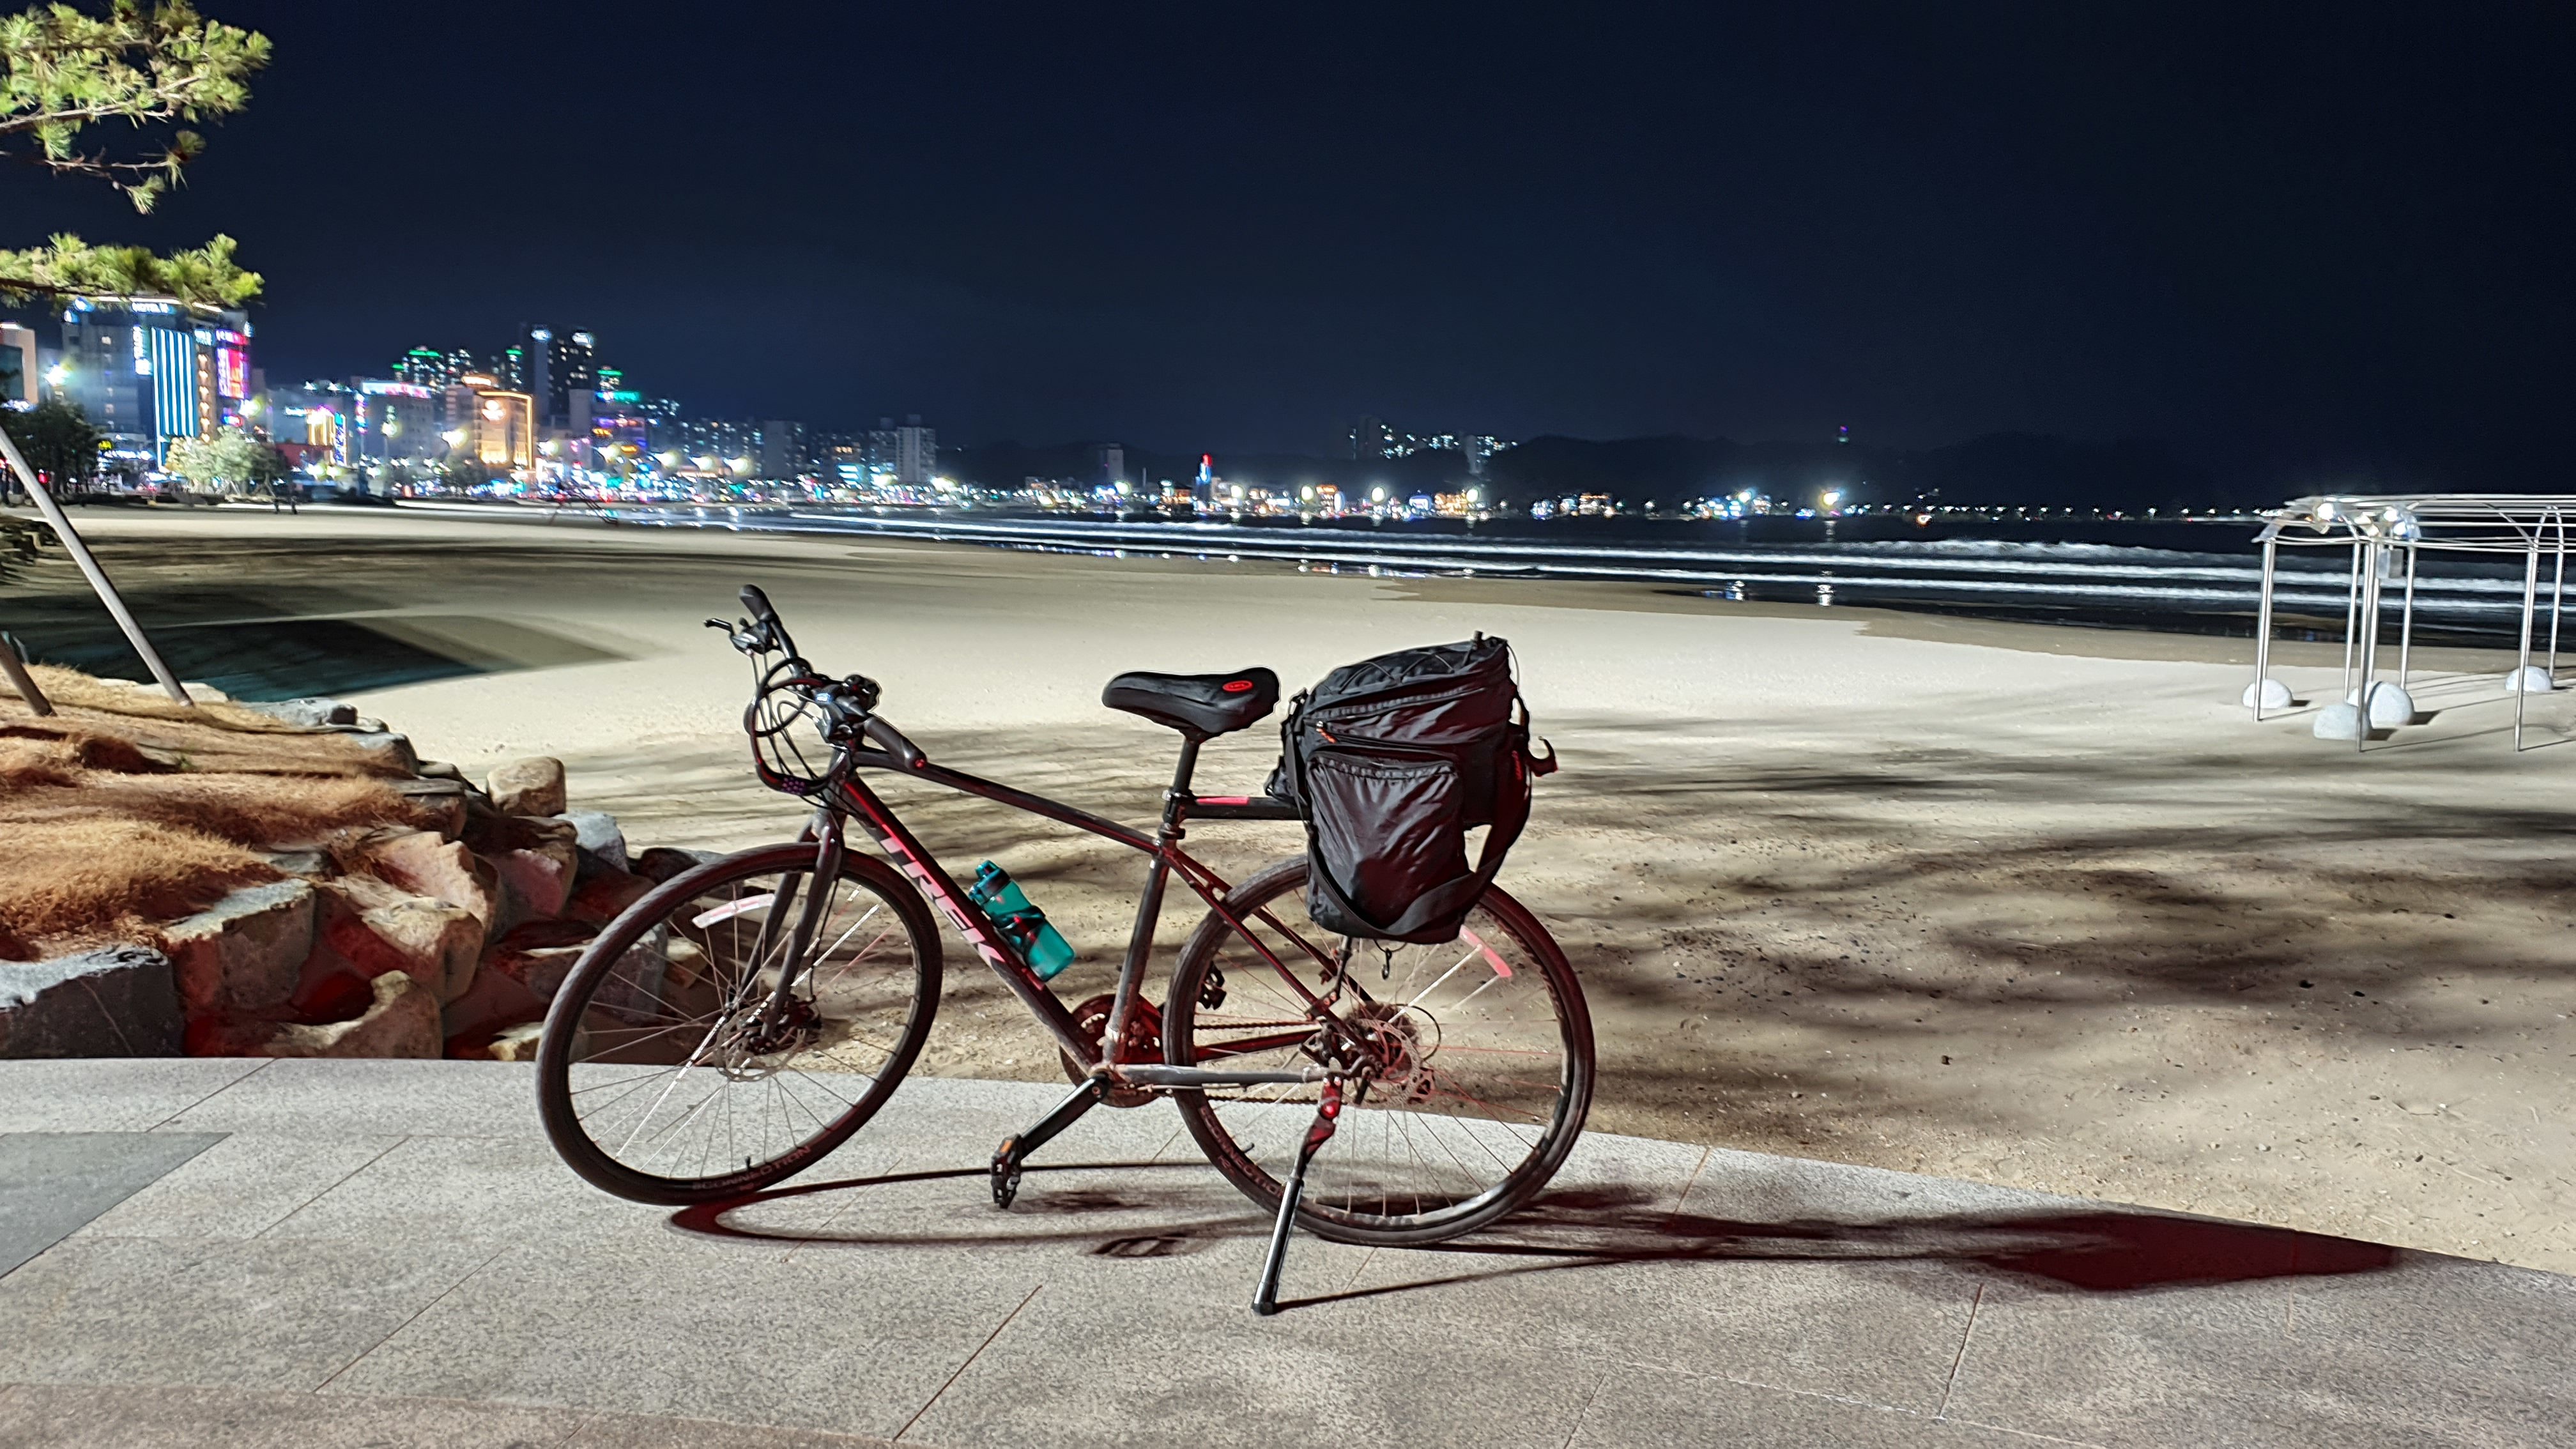 Bicycle on beach at night